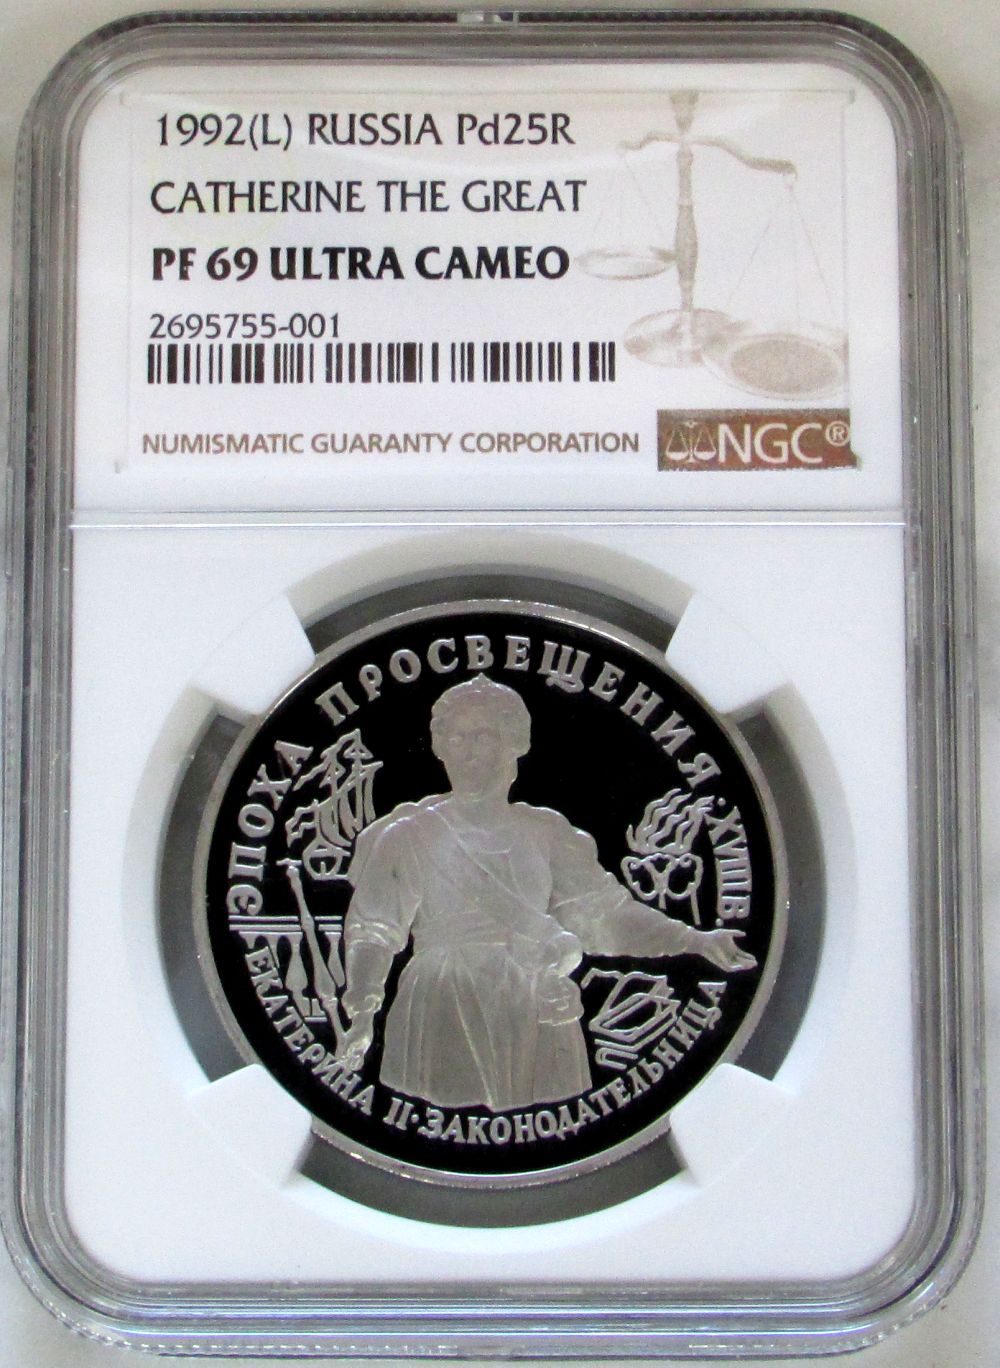 1992 (L) PALLADIUM RUSSIA 25 ROUBLES 1 OZ CATHERINE THE GREAT COIN NGC PROOF 69 ULTRA CAMEO